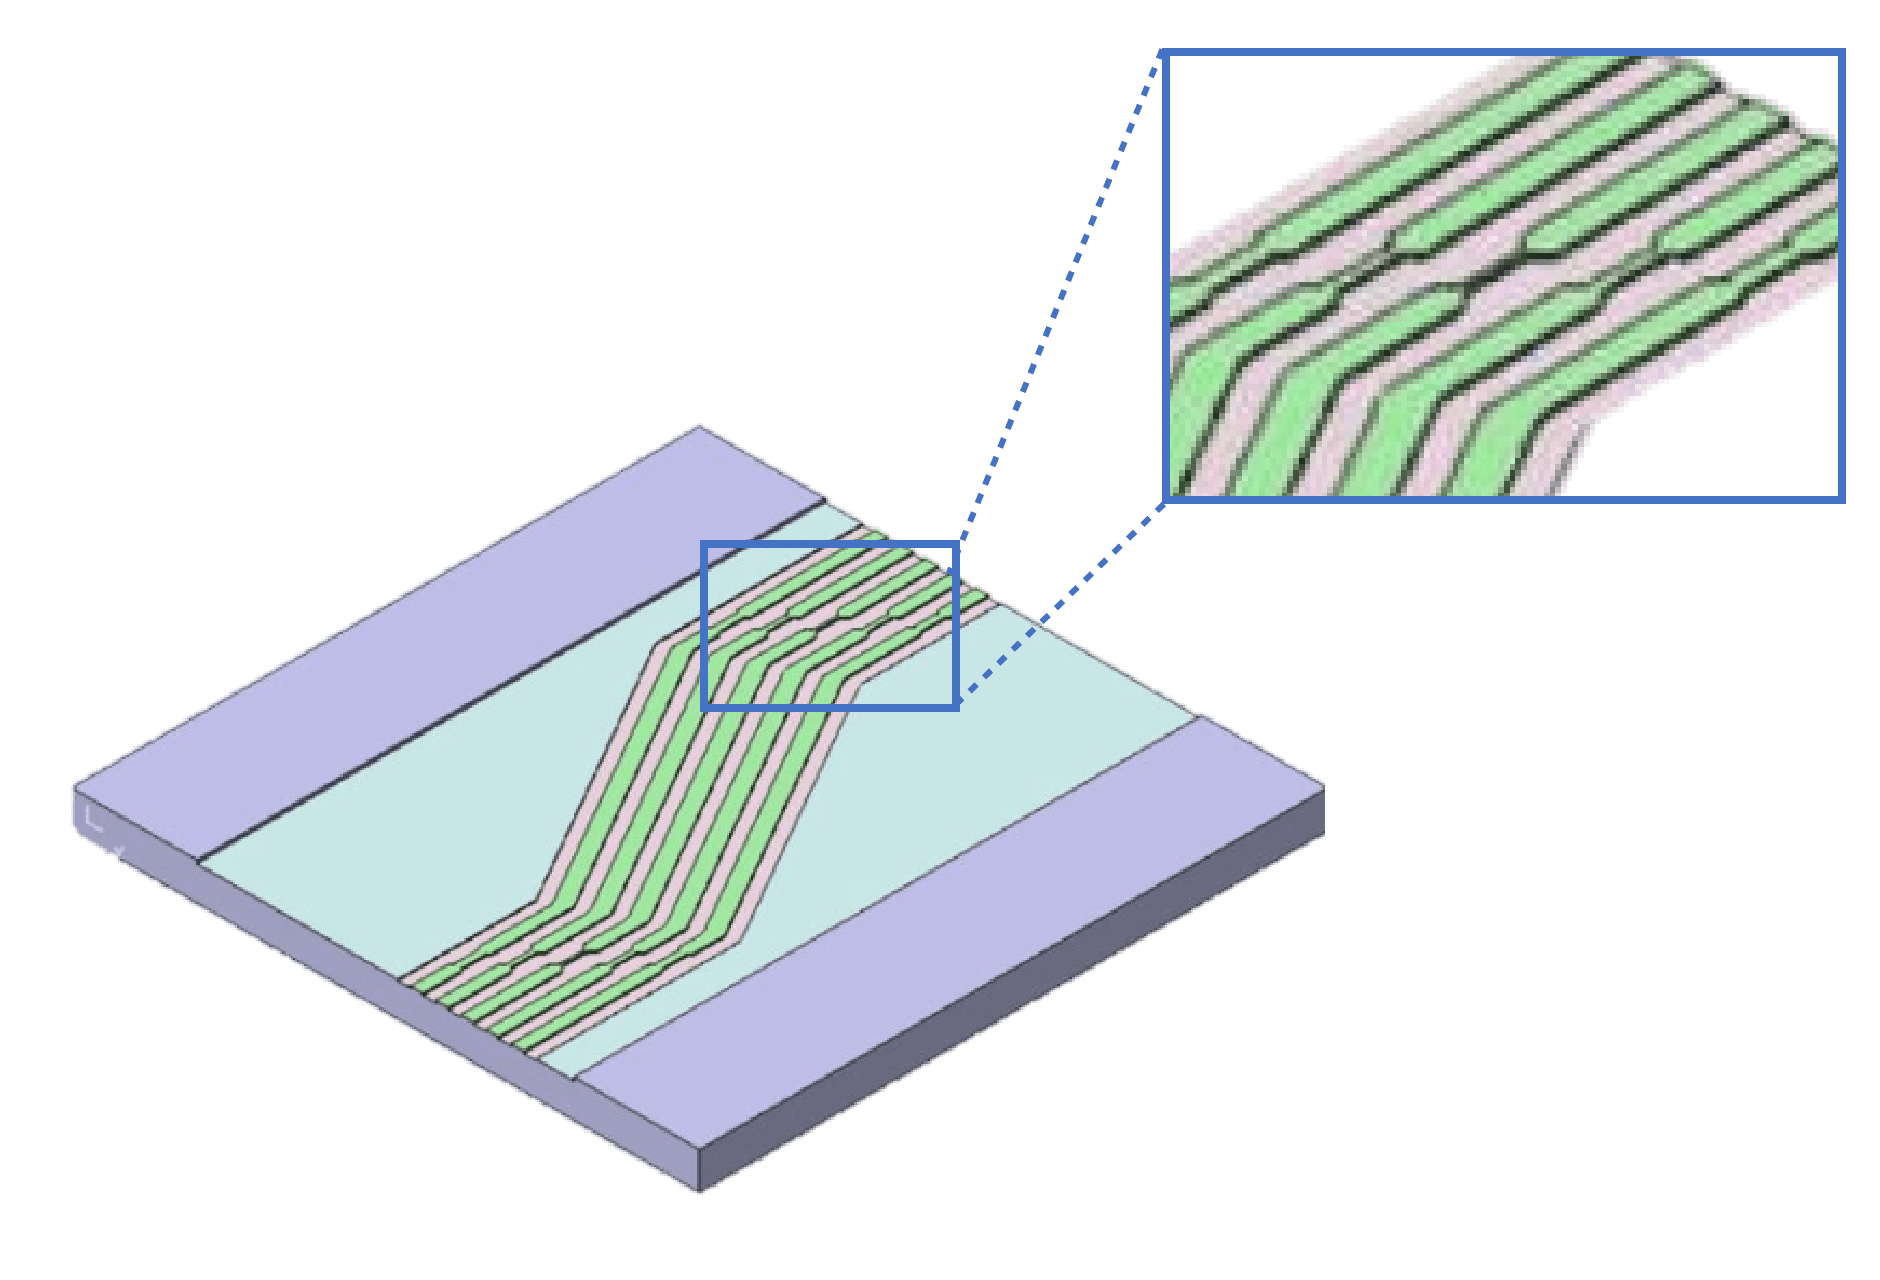 Processing is done that reproduces the structure incorporating flow channels with various channel limiting shapes (enlarged in the blue frame).